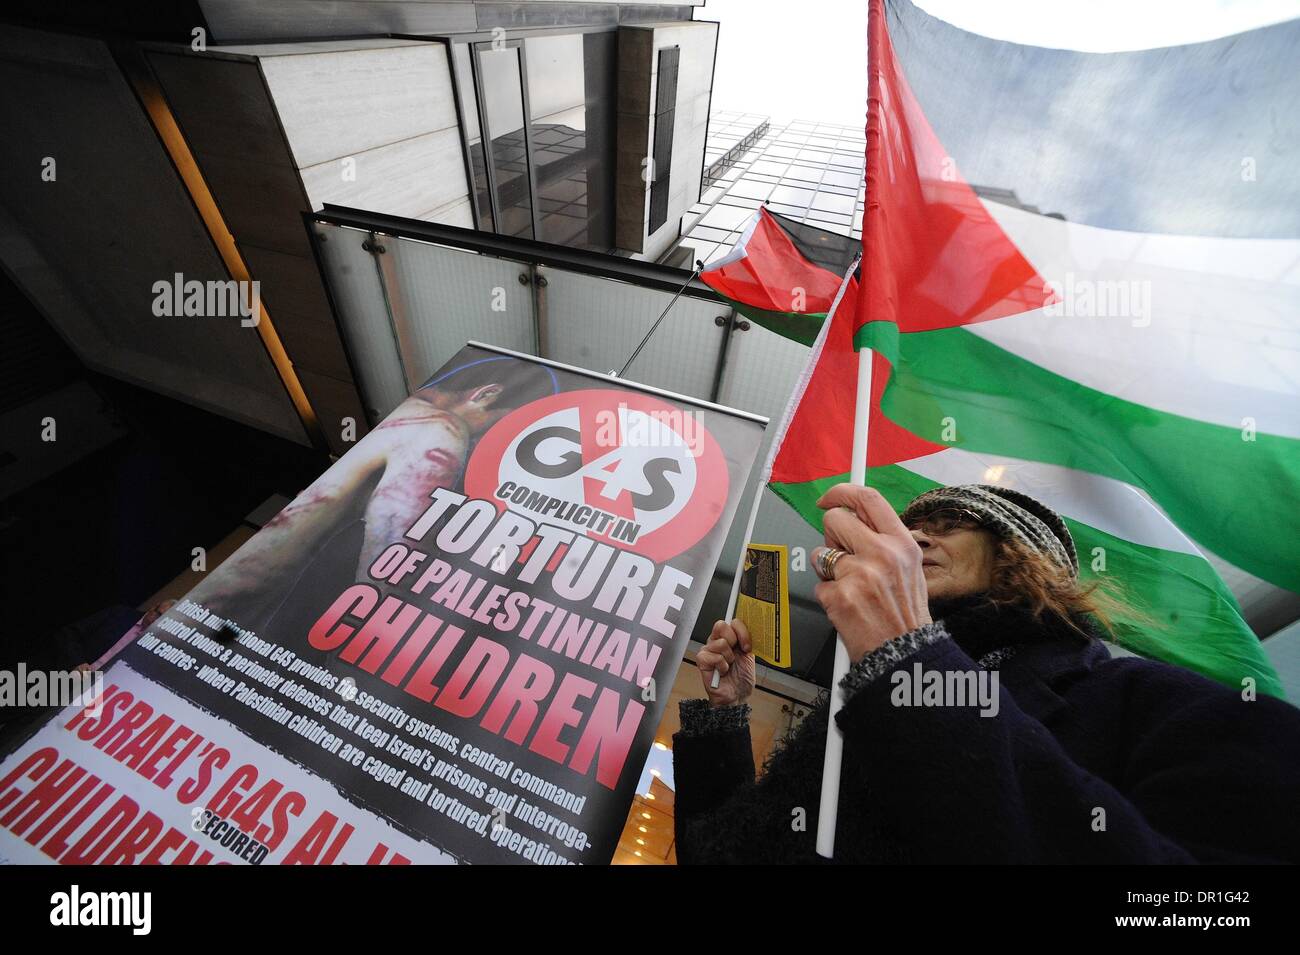 London, UK, UK. 17th Jan, 2014. Palestinians and supporters held a protest outside the G4S headquarters . G4S is a British-Danish security company that provides serves and equipment to Israeli prisons, checkpoints and patrols the Israel West Bank barrier. The group.alleges the security firm uses torture on its political prisoners. Credit:  Gail Orenstein/ZUMAPRESS.com/Alamy Live News Stock Photo